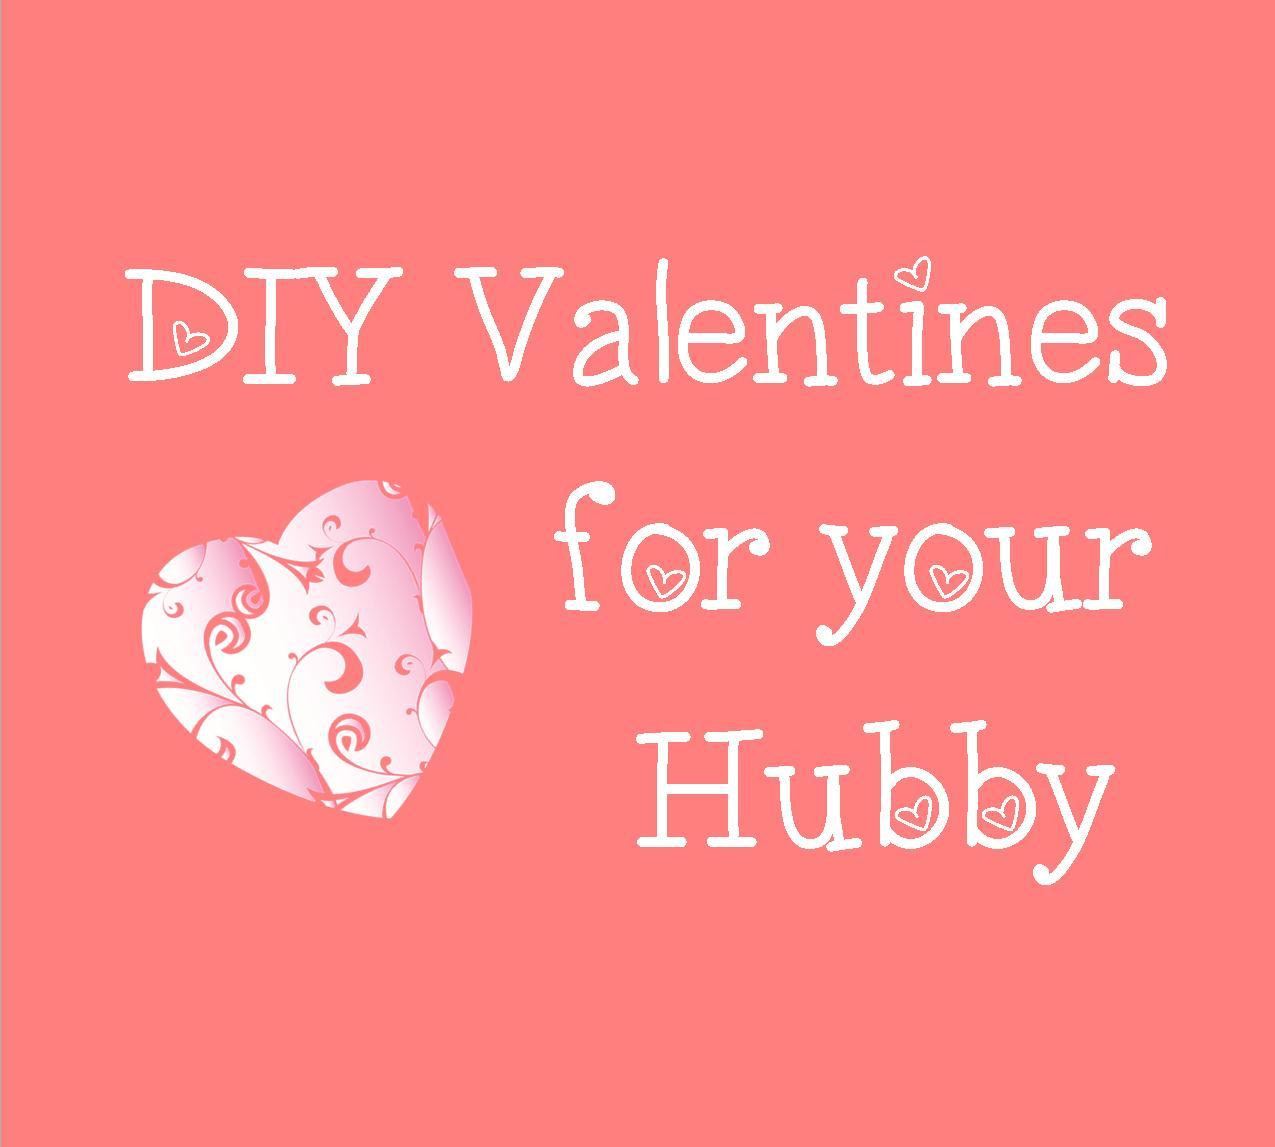 Ideas For Valentines Day For Husband
 Crafty WI Mama Valentines for the Hubby